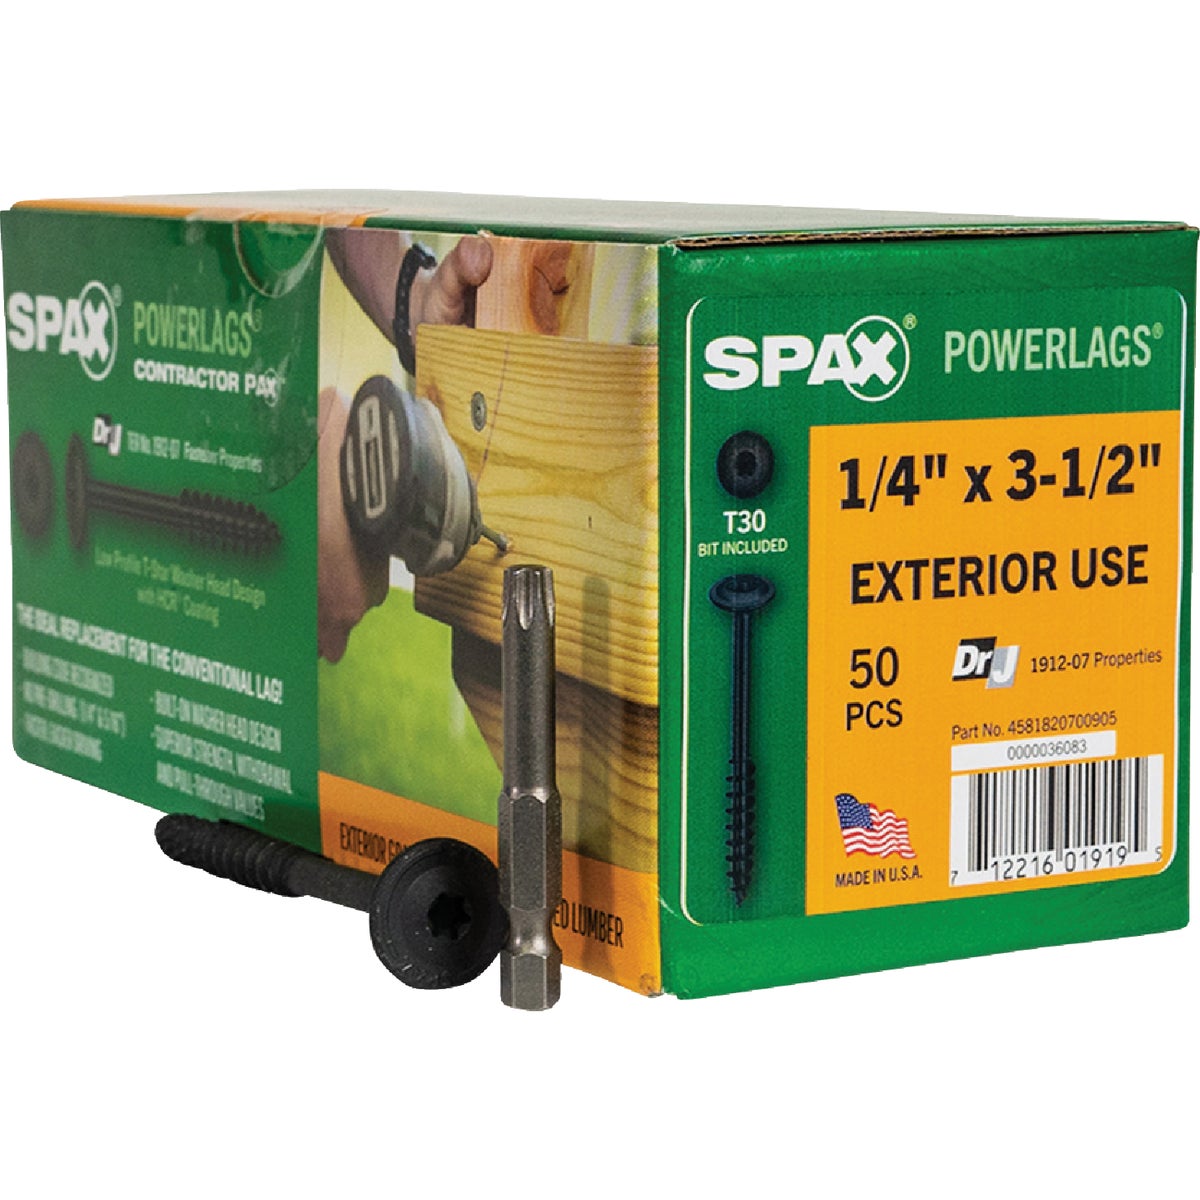 Spax PowerLags 1/4 In. x 3-1/2 In. Washer Head Exterior Structure Screw (50 Ct.)